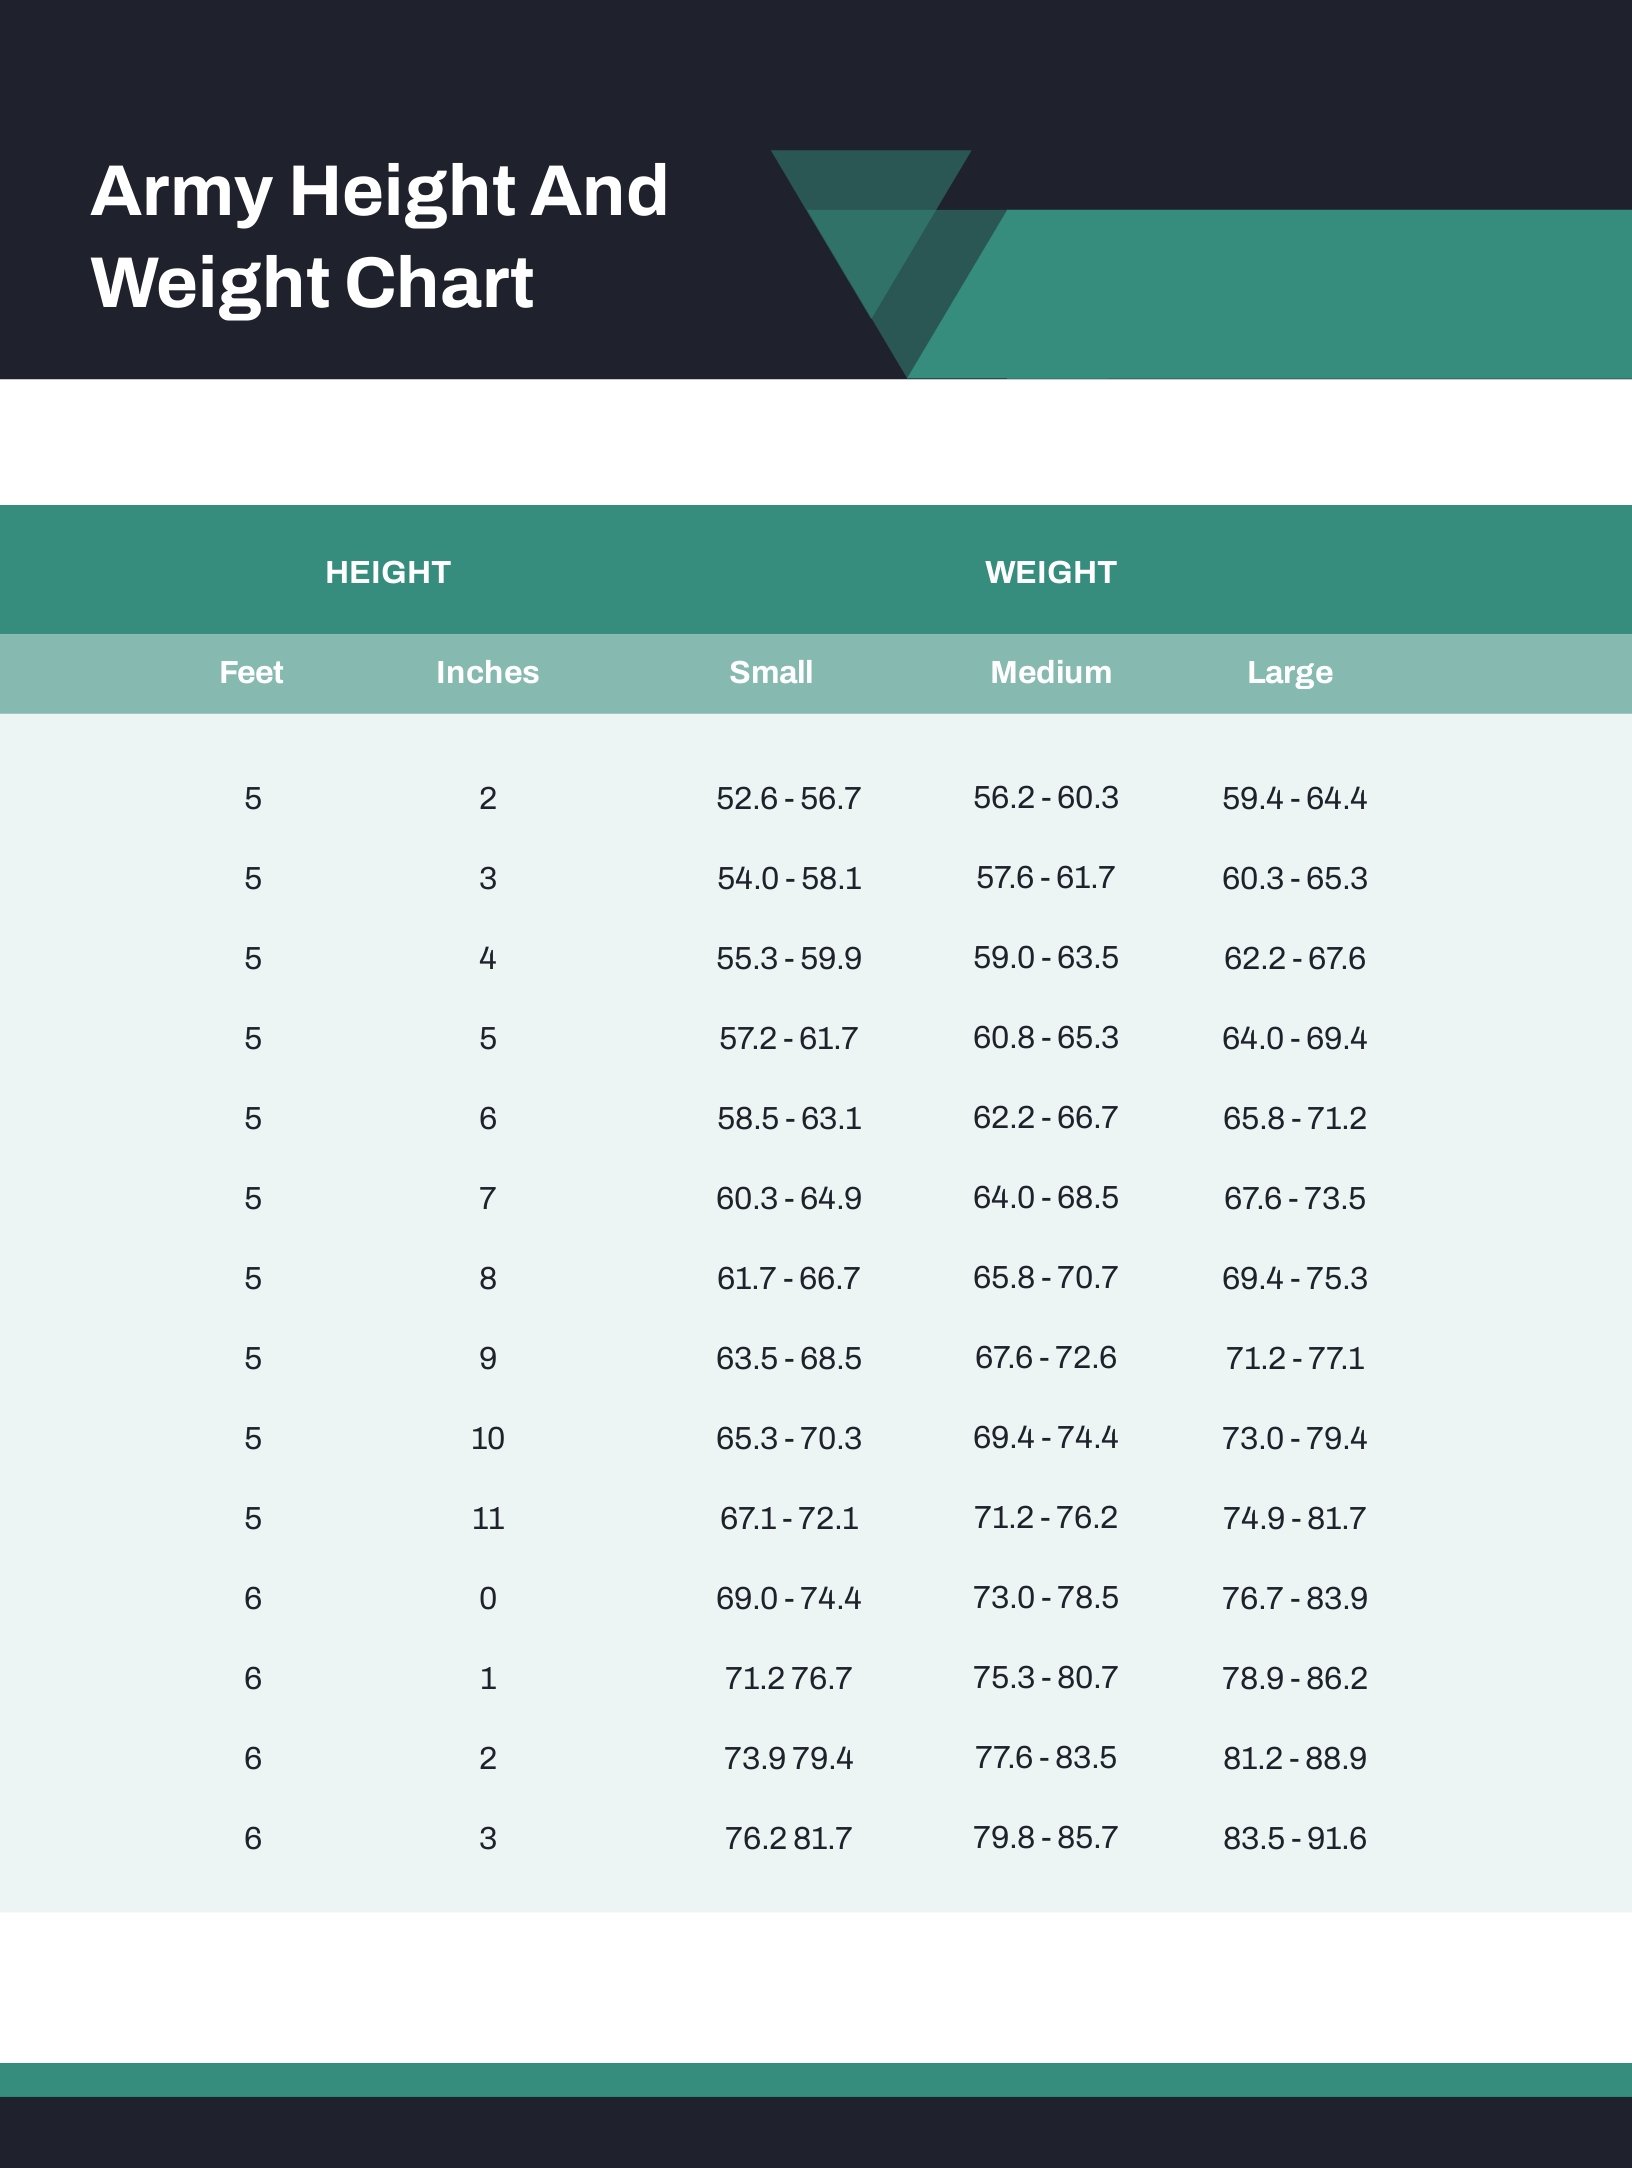 Free Army Height And Weight Standards Chart Download in PDF